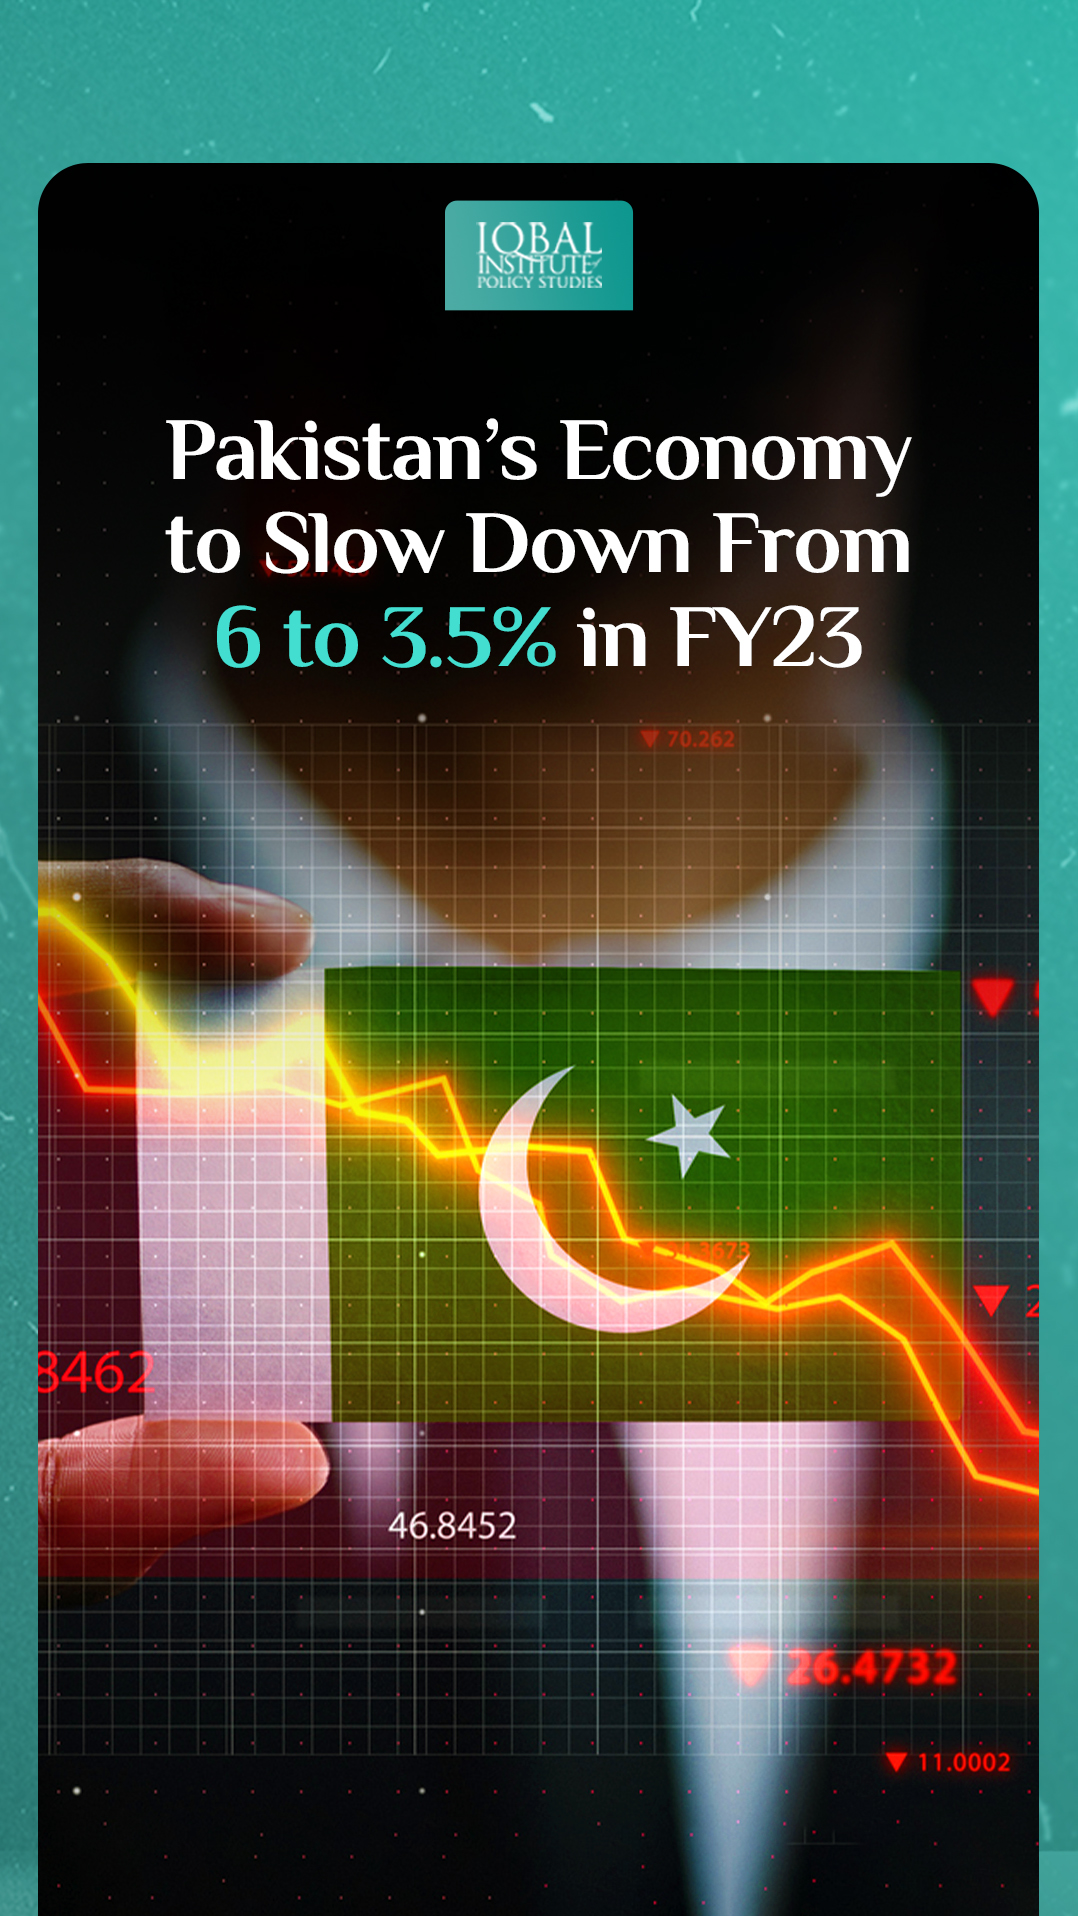 Pakistan’s economy to slow down from 6 to 3.5% in FY23